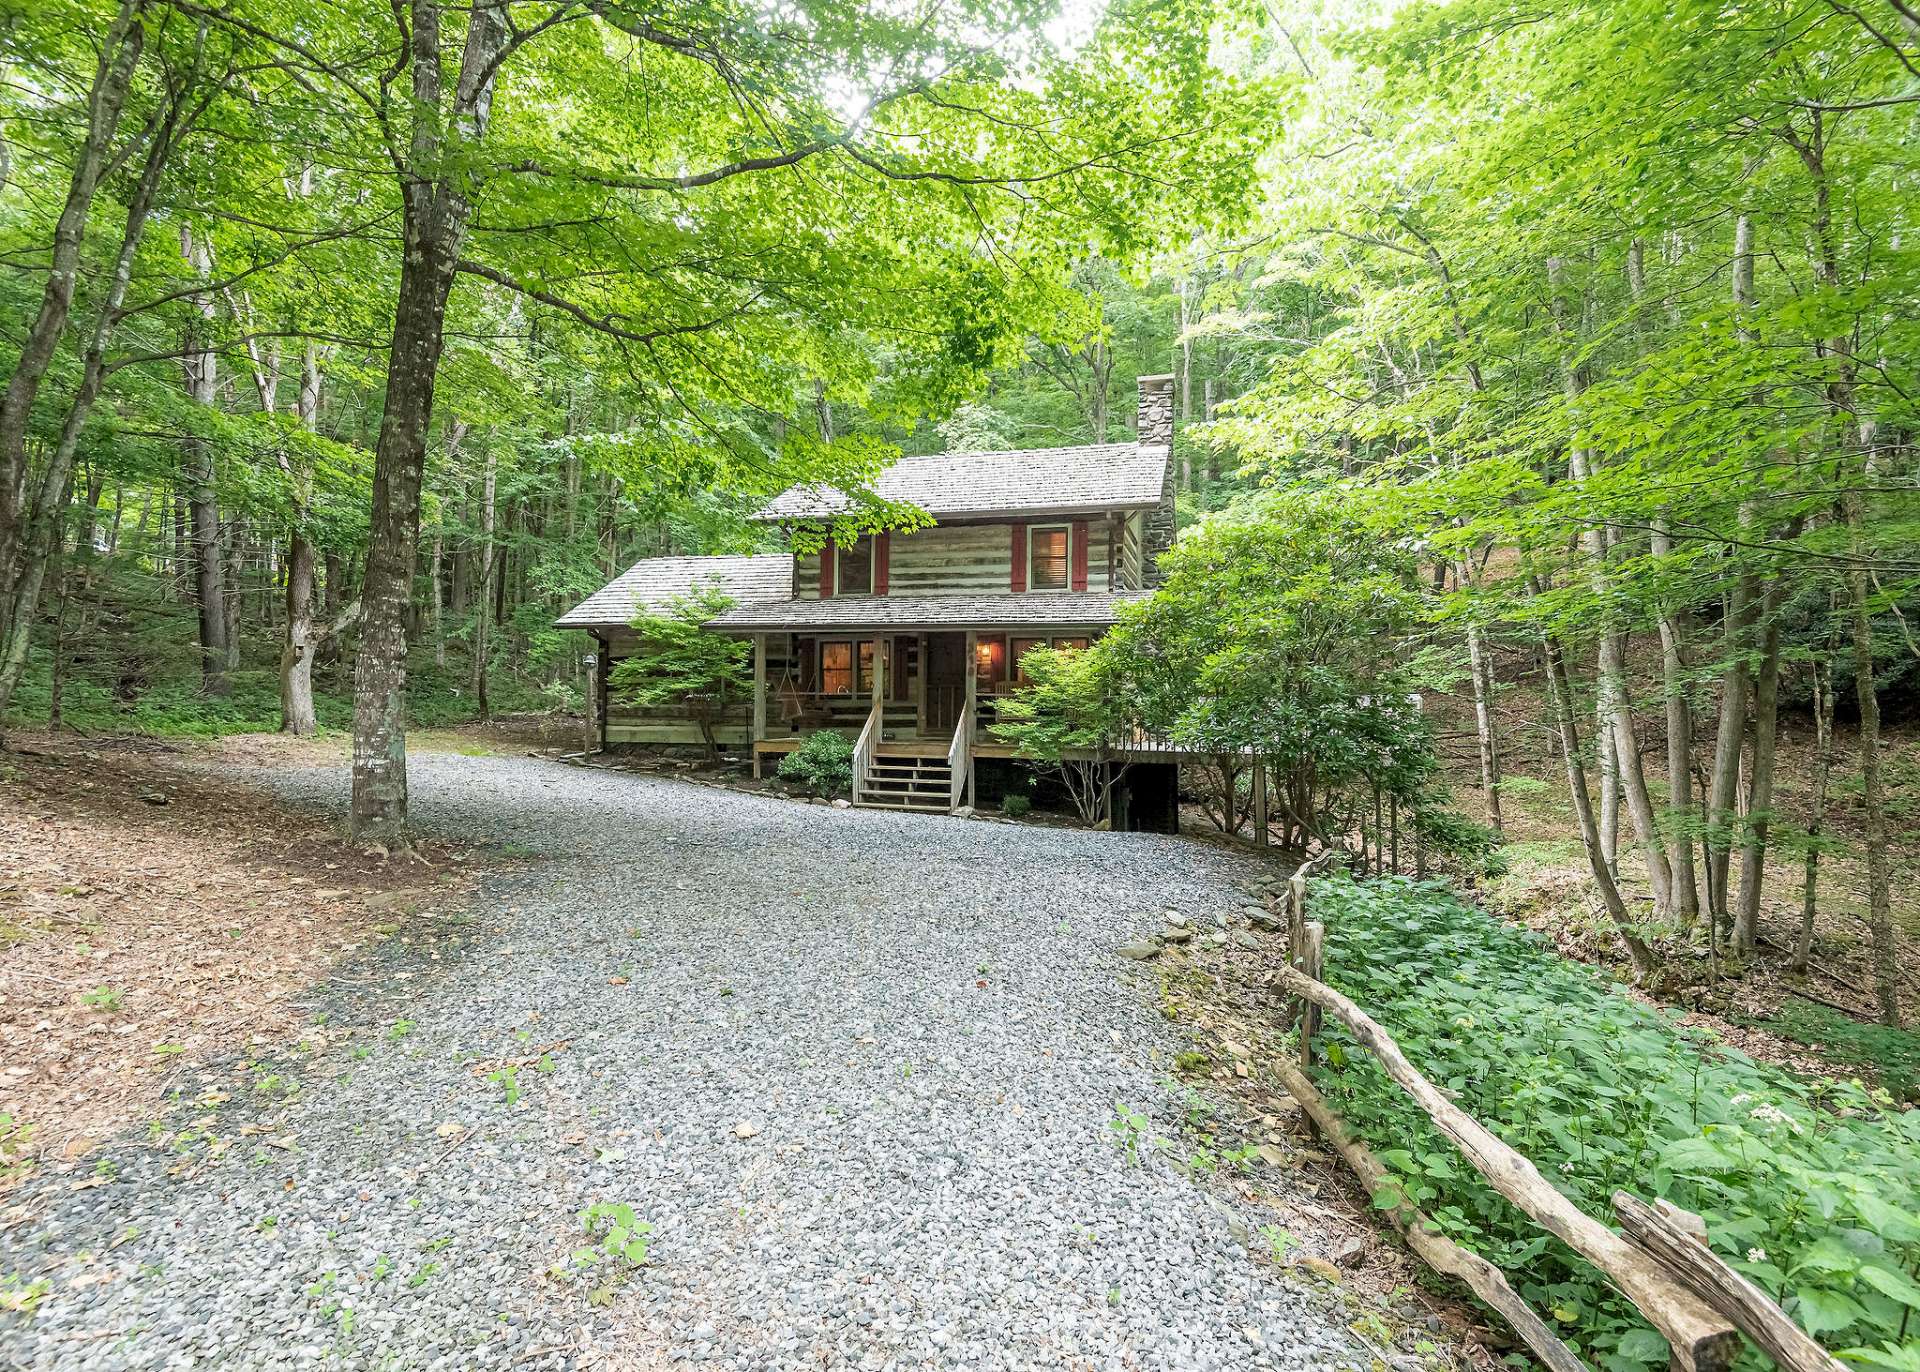 Tucked away in a wooded setting in the highly sought after log cabin community of Stonebridge, this 2-bedroom, 2-bath log cabin offers the true log cabin living experience and located in the Todd area of Southern Ashe County.